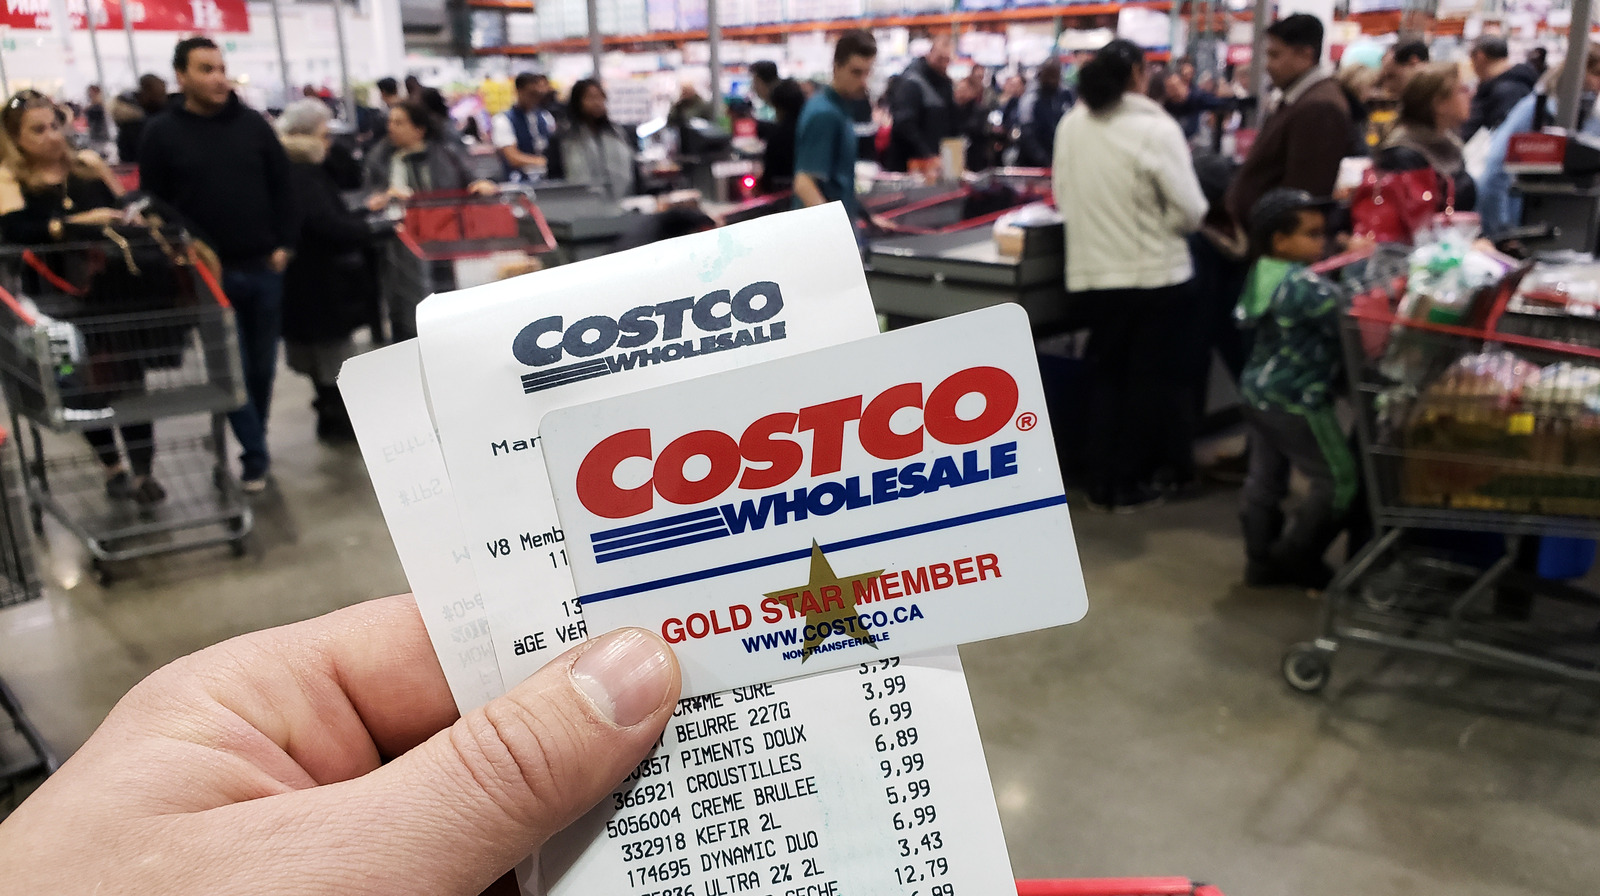 Costco Membership Rules And How To Shop Without A Membership - MTL